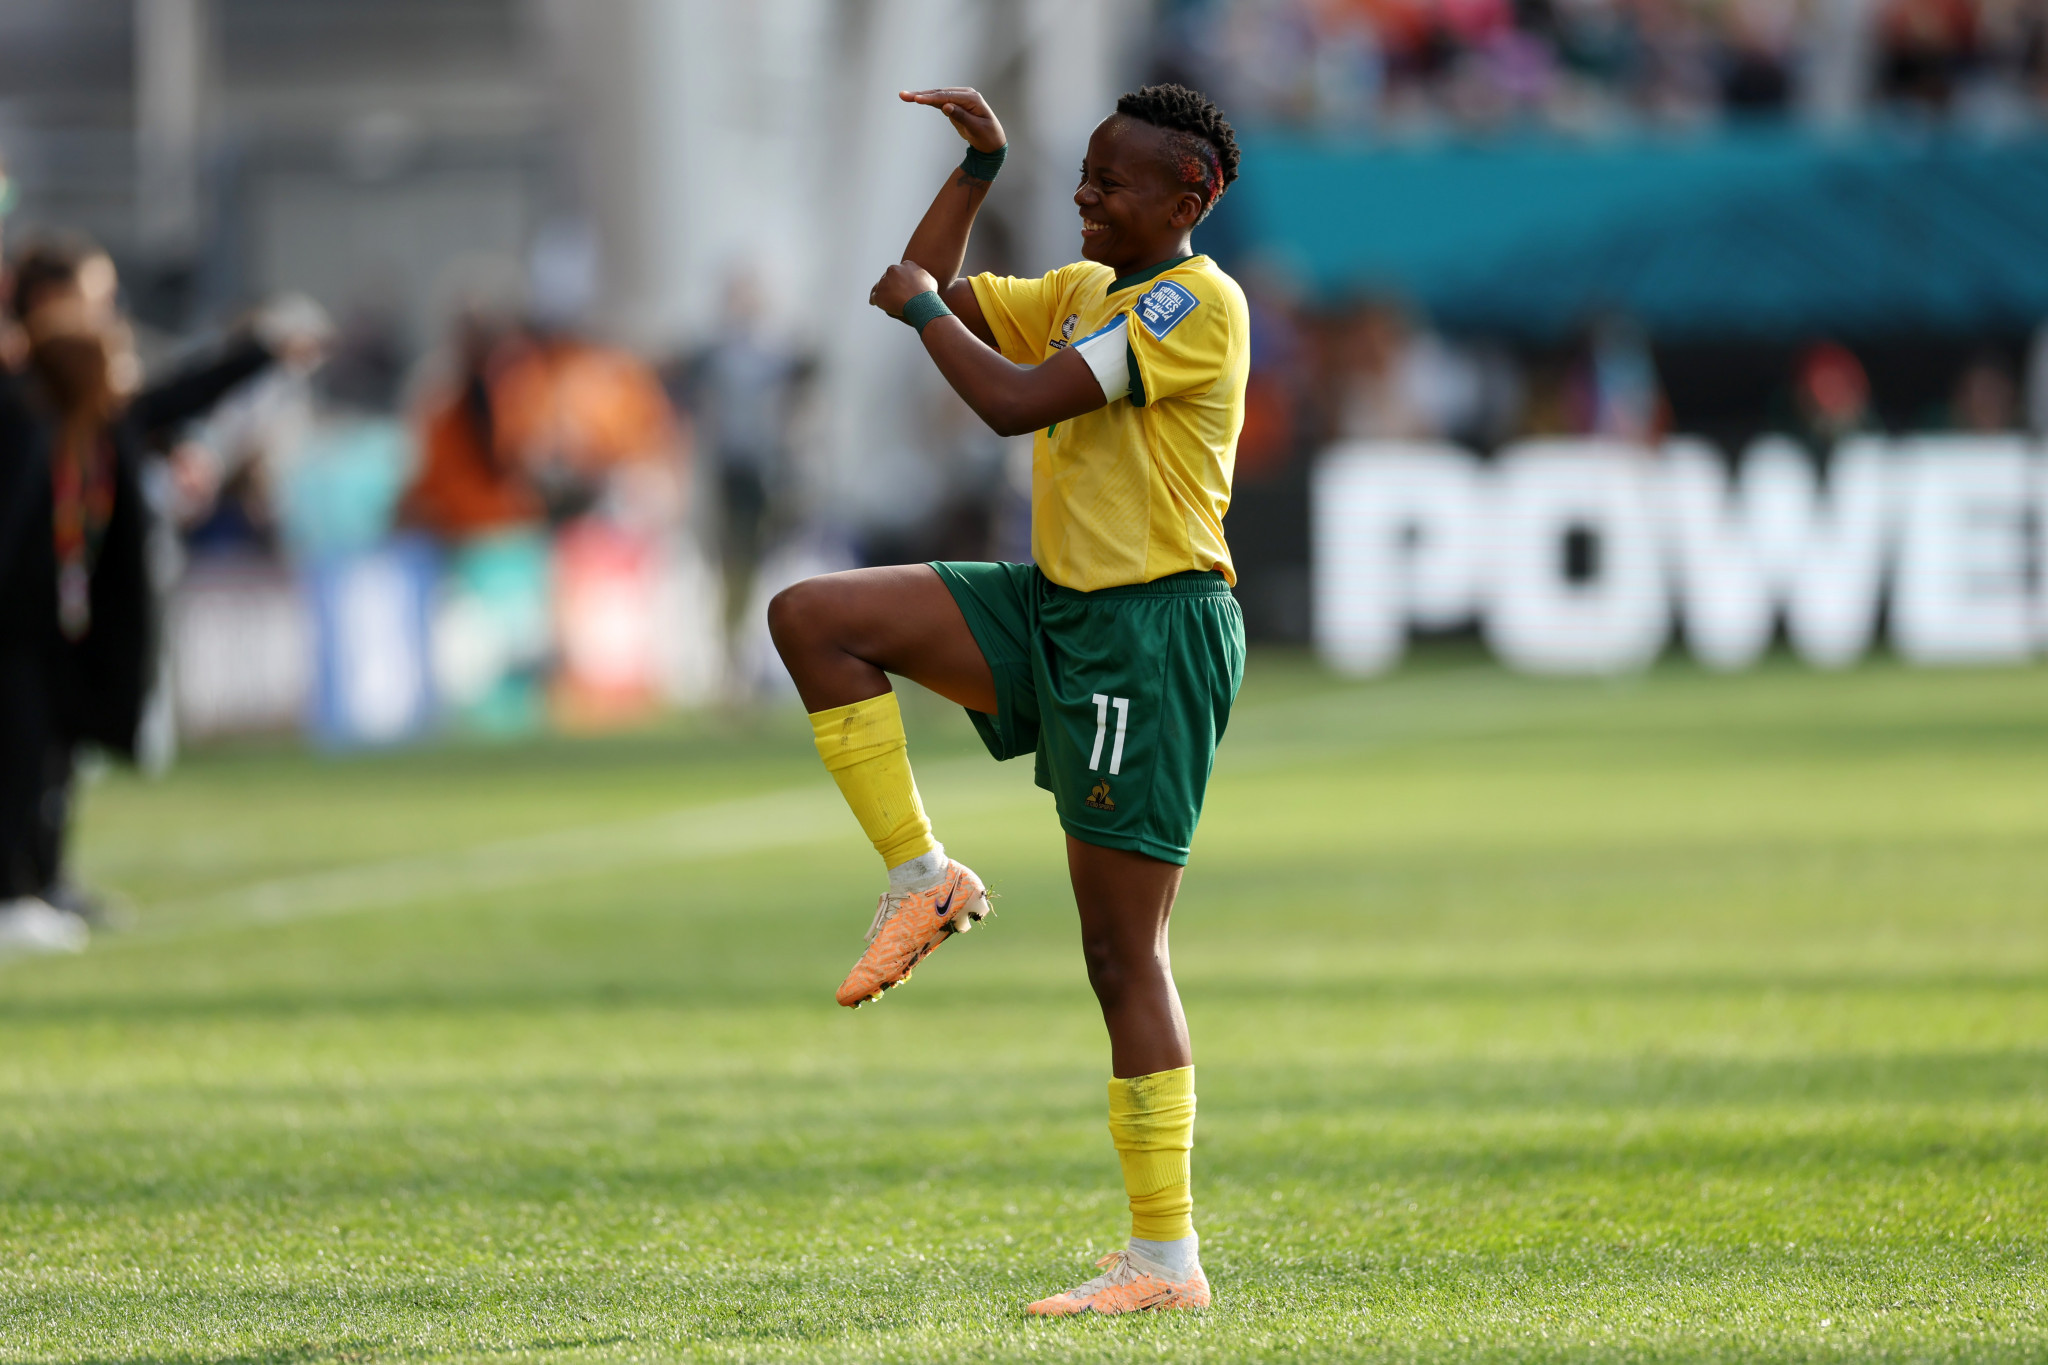 Thembi Kgatlana added one more to double the advantage in the second half ©Getty Images